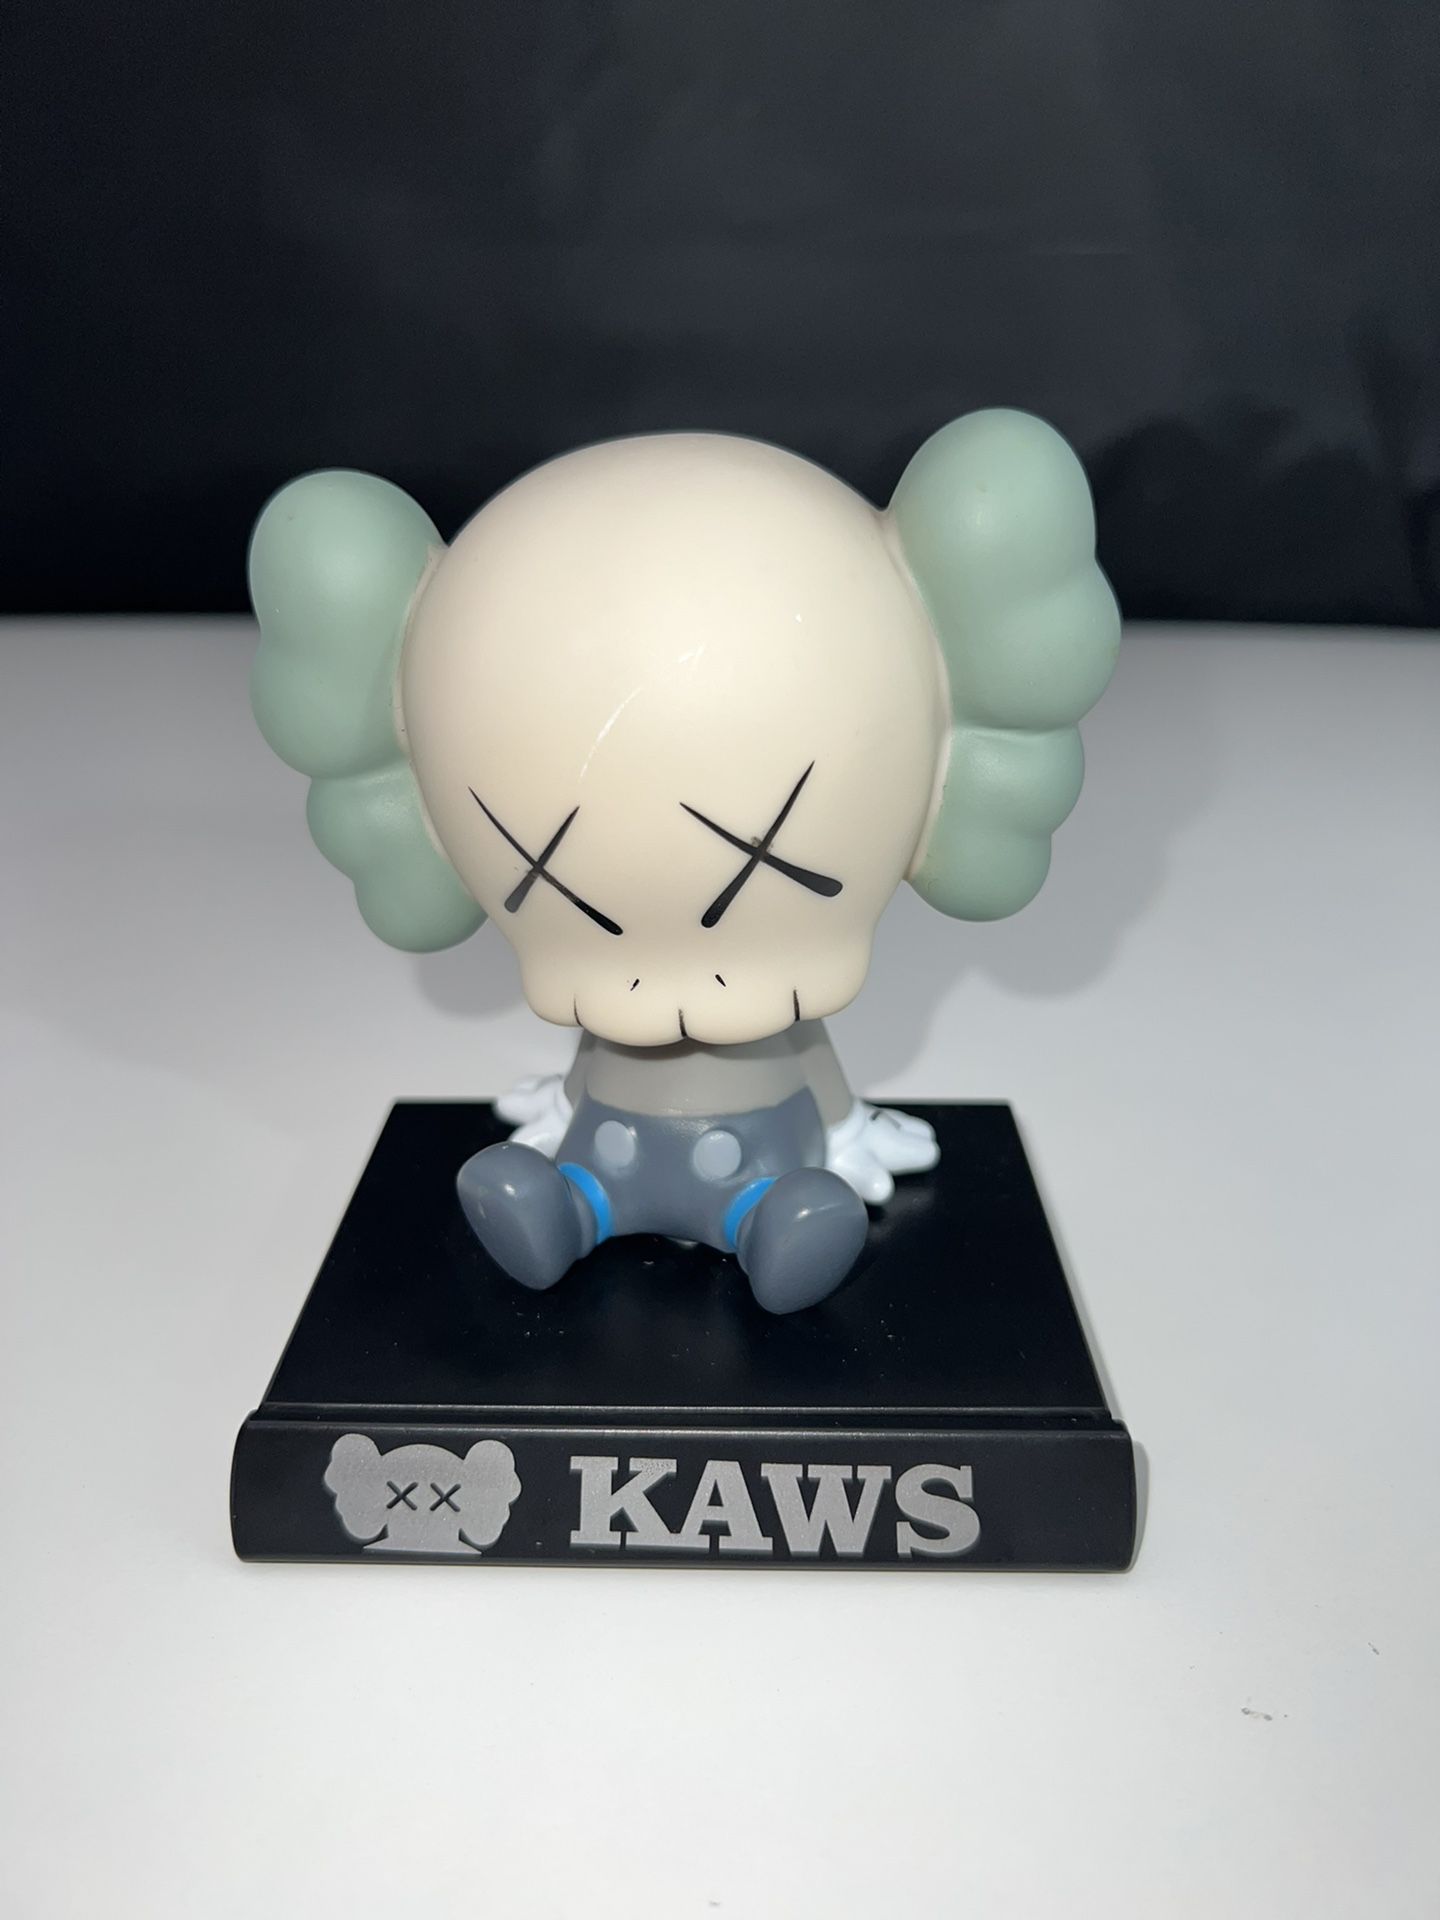 KAWS Inspired Sculpture Bear Figure Collectibles Building Blocks Small, Home Decoration, Model Toy Unique Present Gift - Tan W/ Green Ears